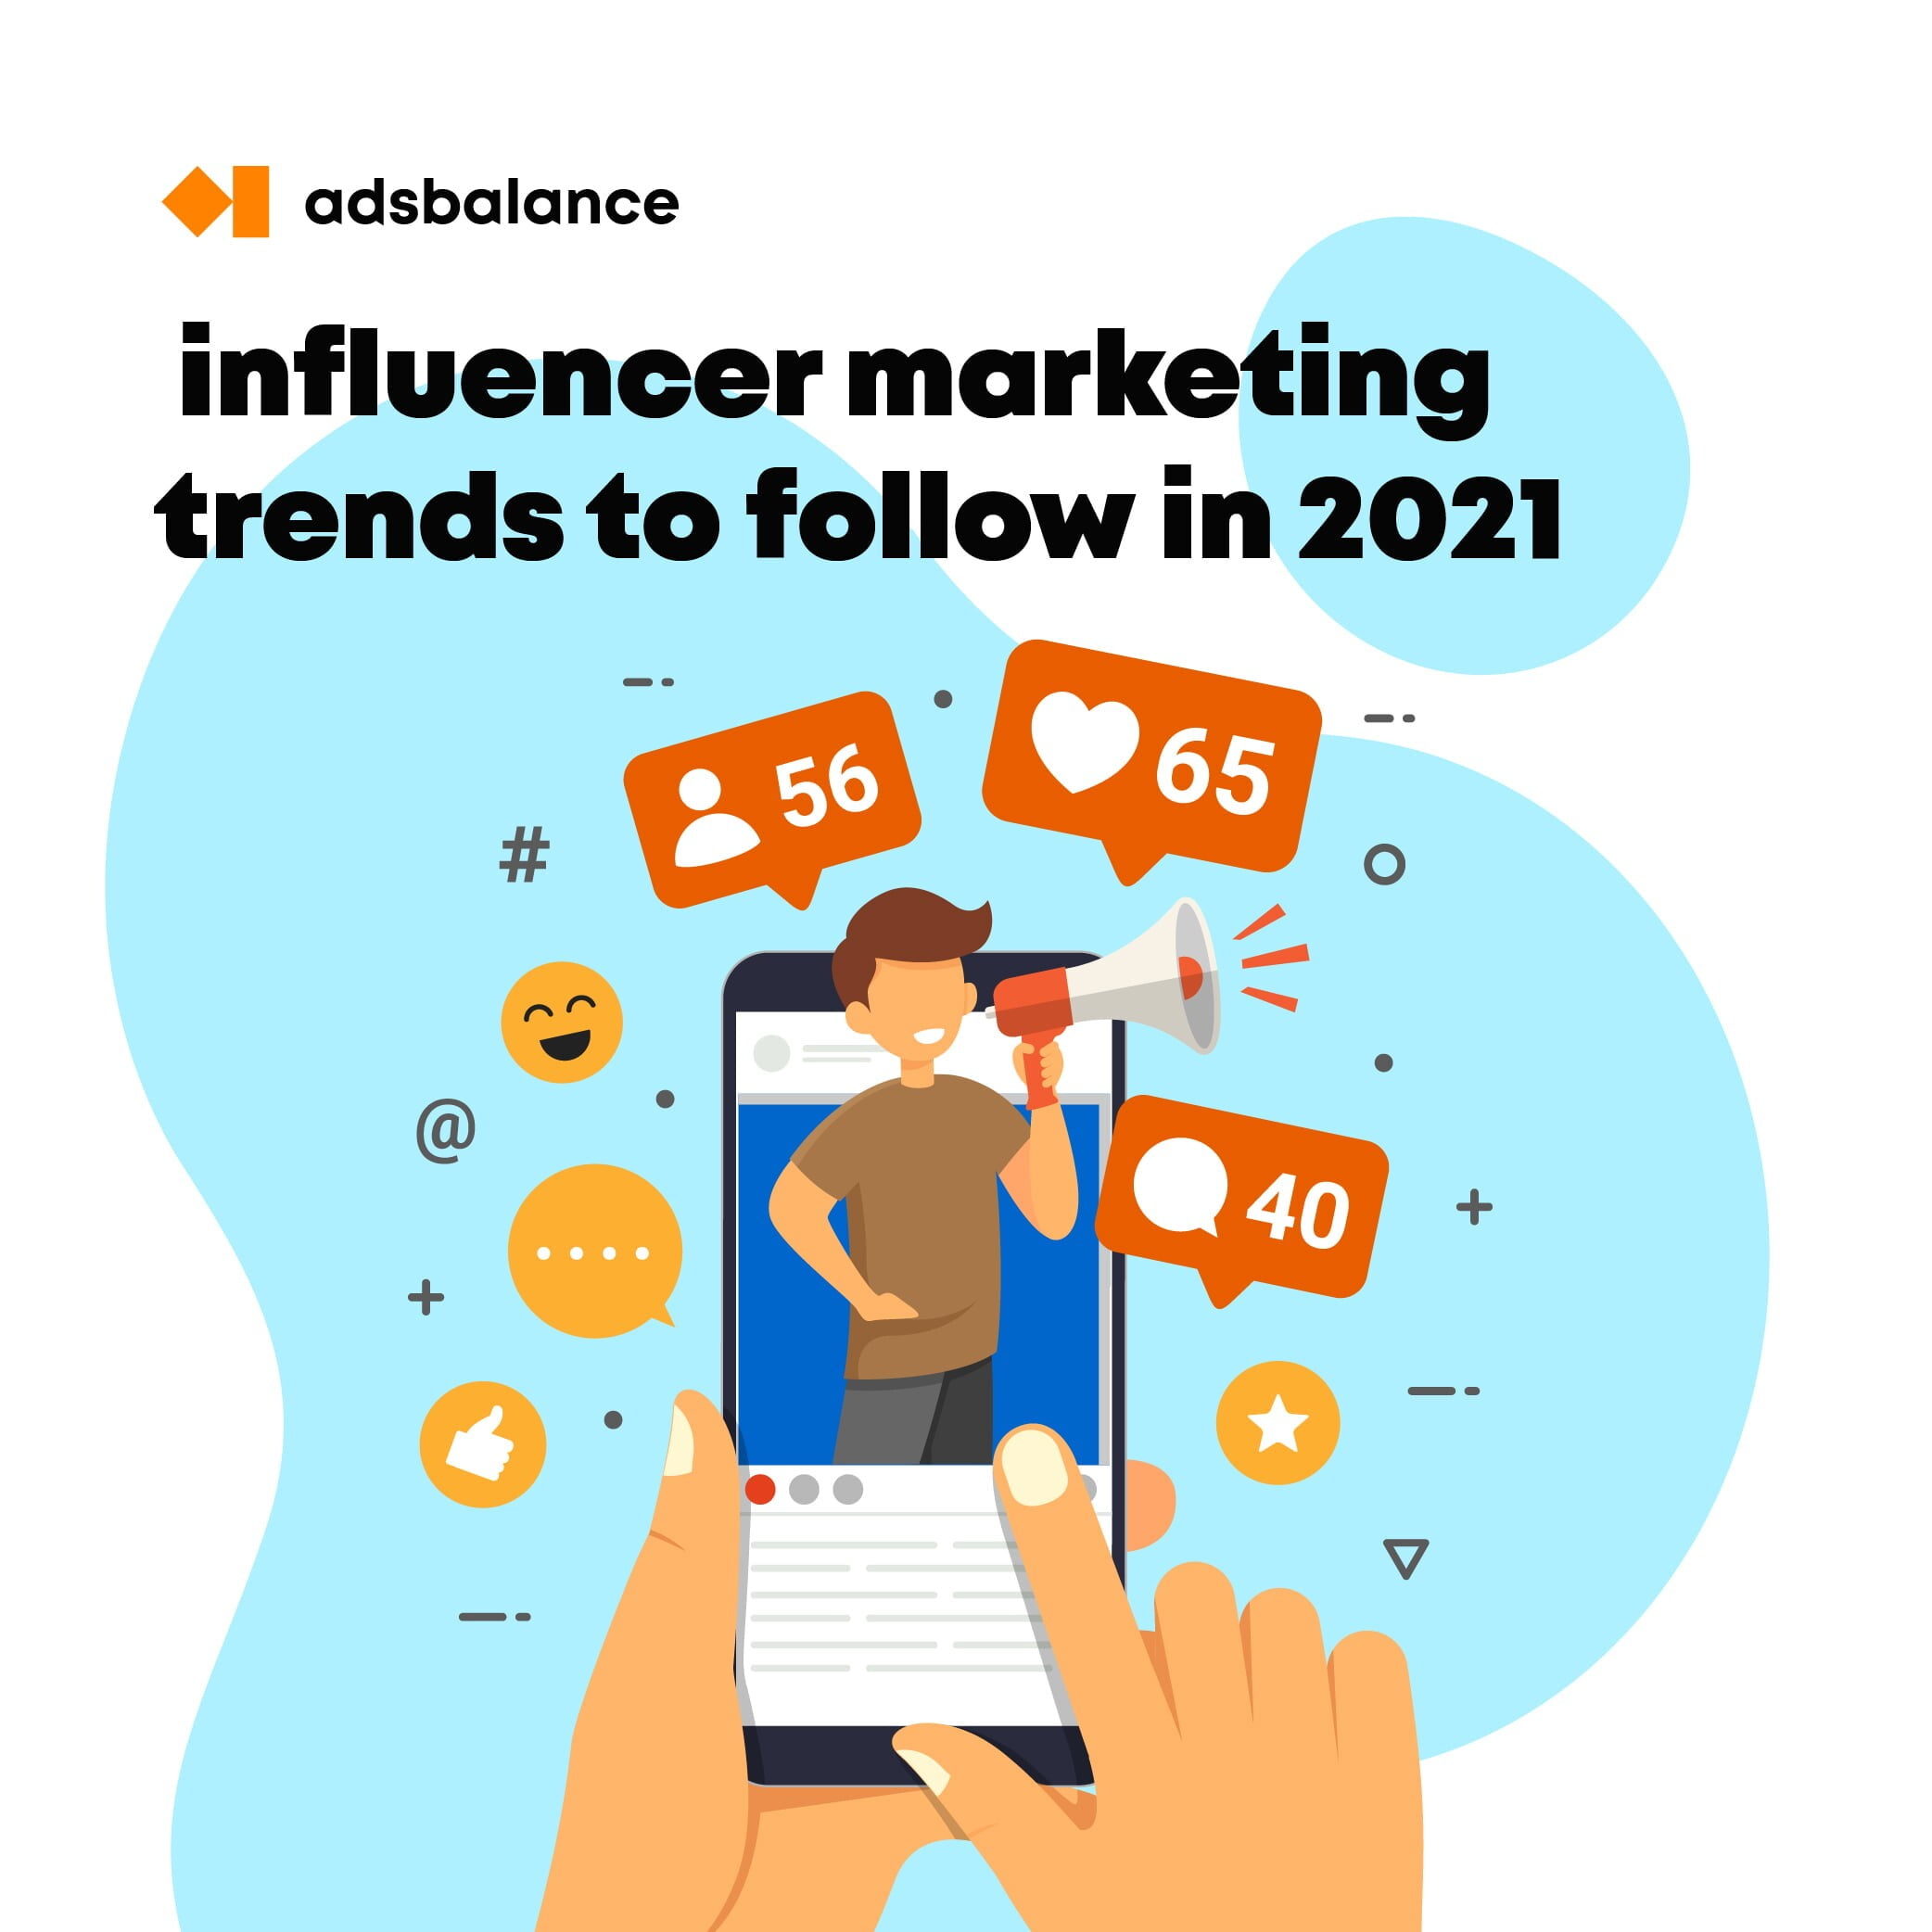 7 Influencer marketing trends to follow in 2021